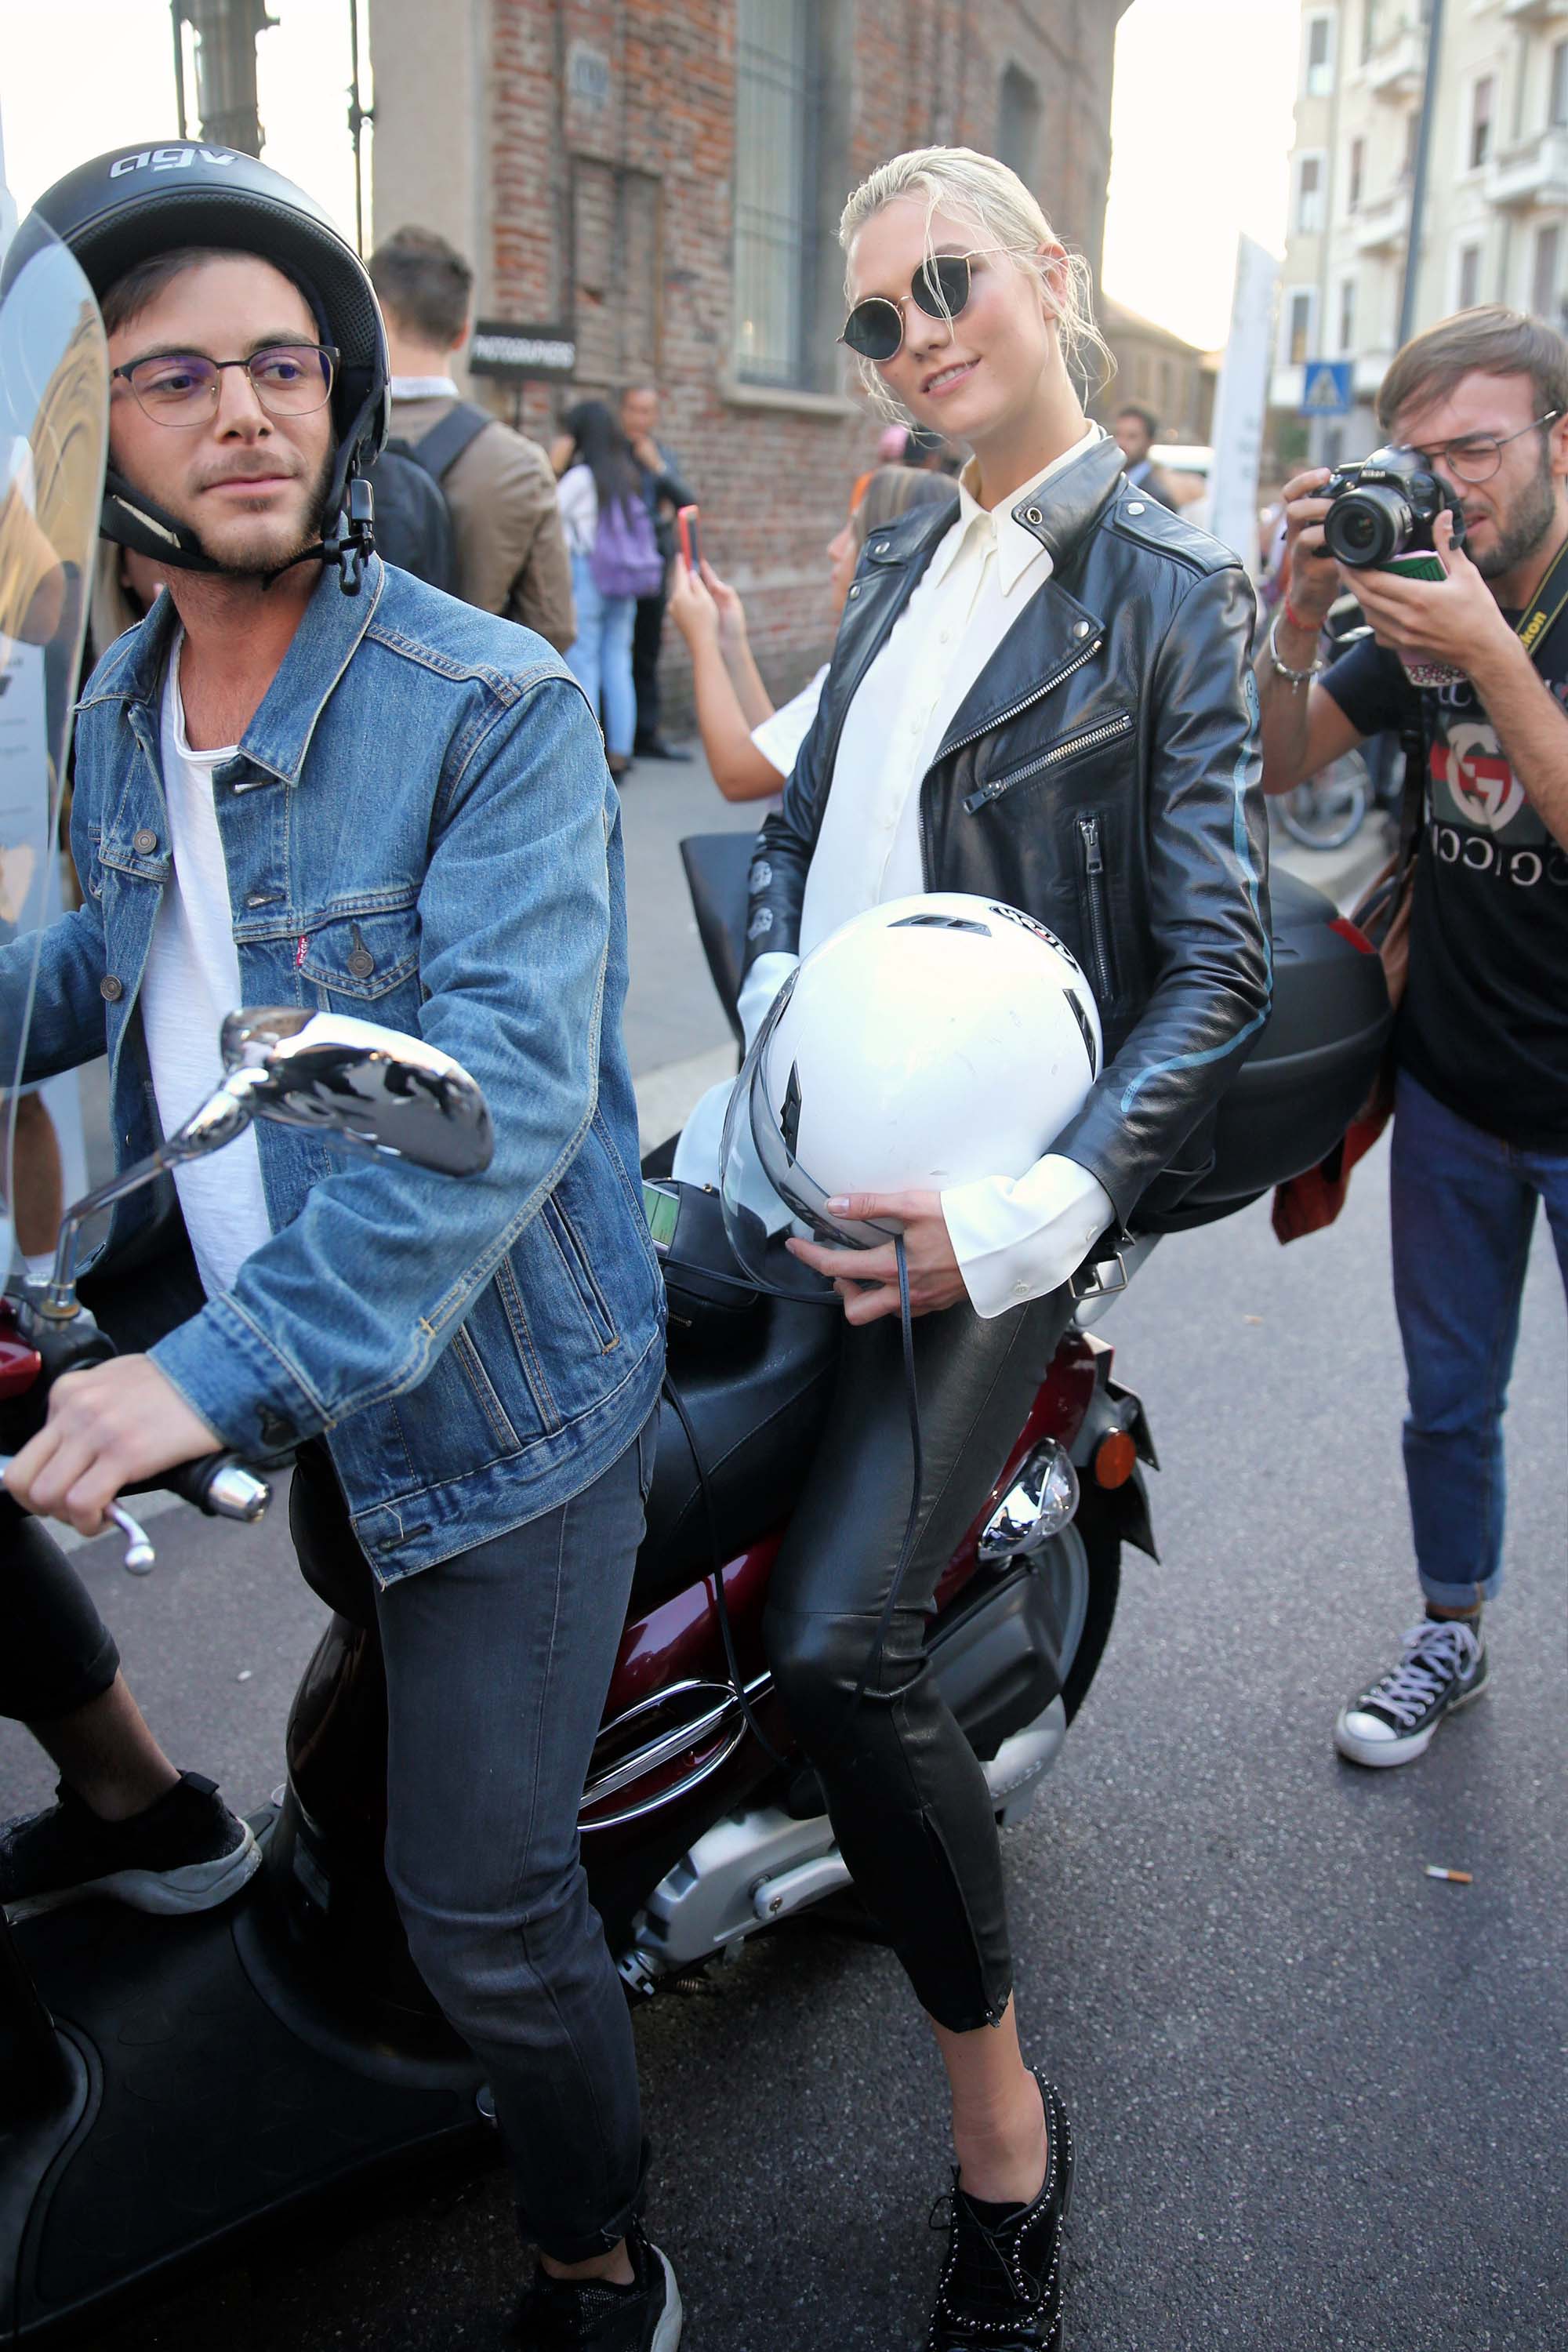 Karlie Kloss rides off on a motorcycle after walking the runway in Milan